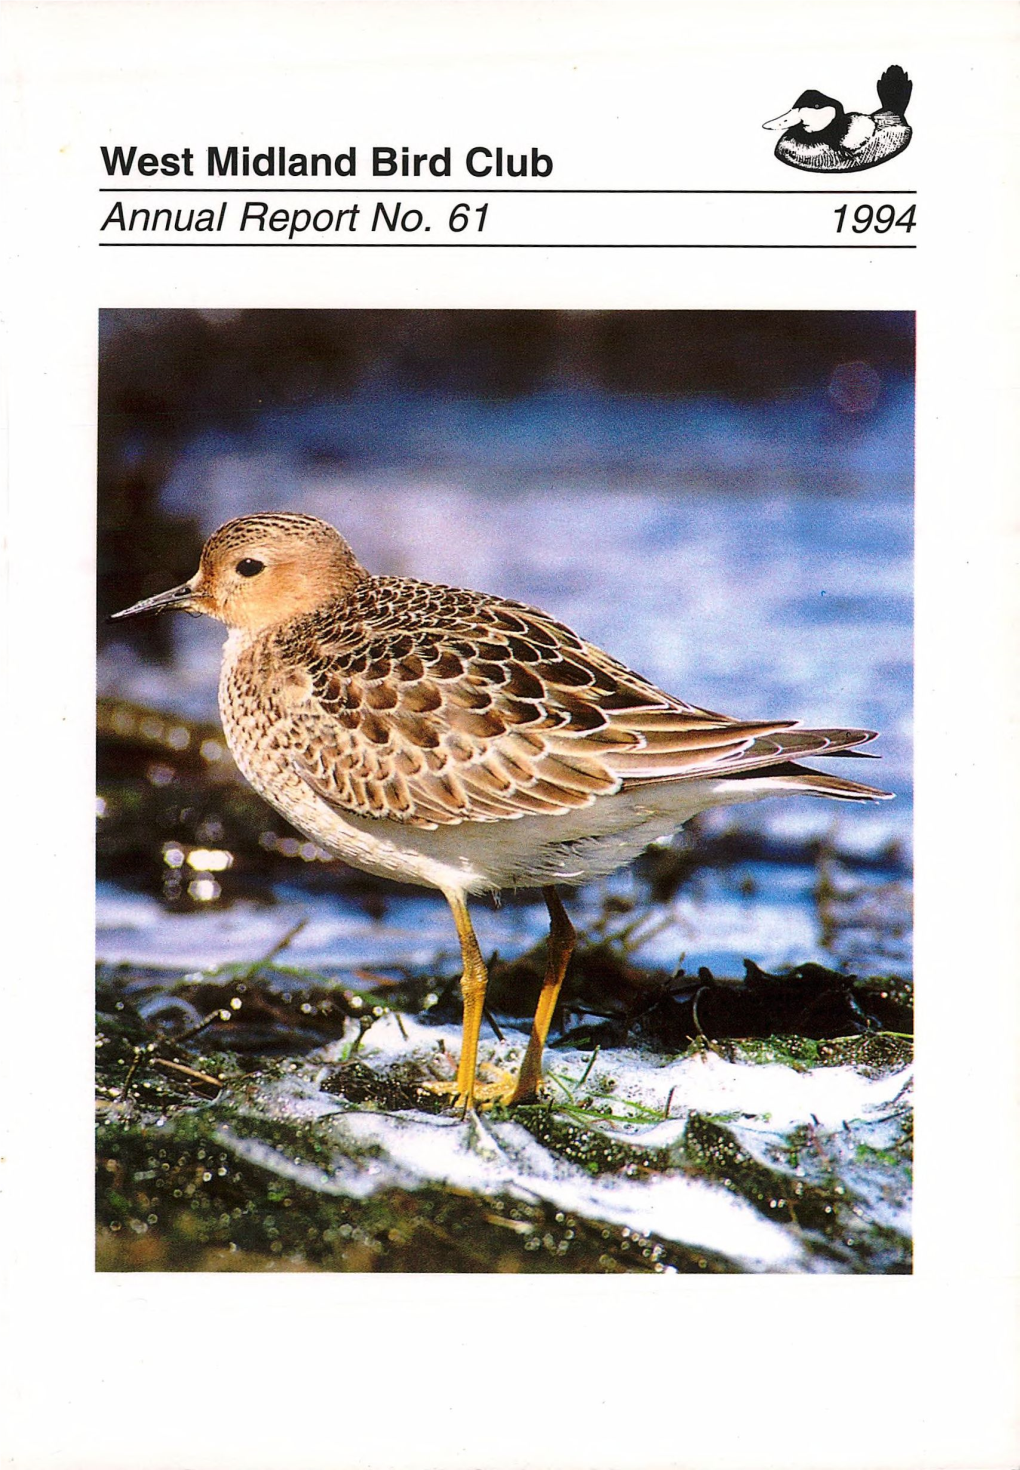 West Midland Bird Club Annual Report No. 61 1994 Buff-Breasted Sandpiper, Draycote, September 1994 (Phill Ward)